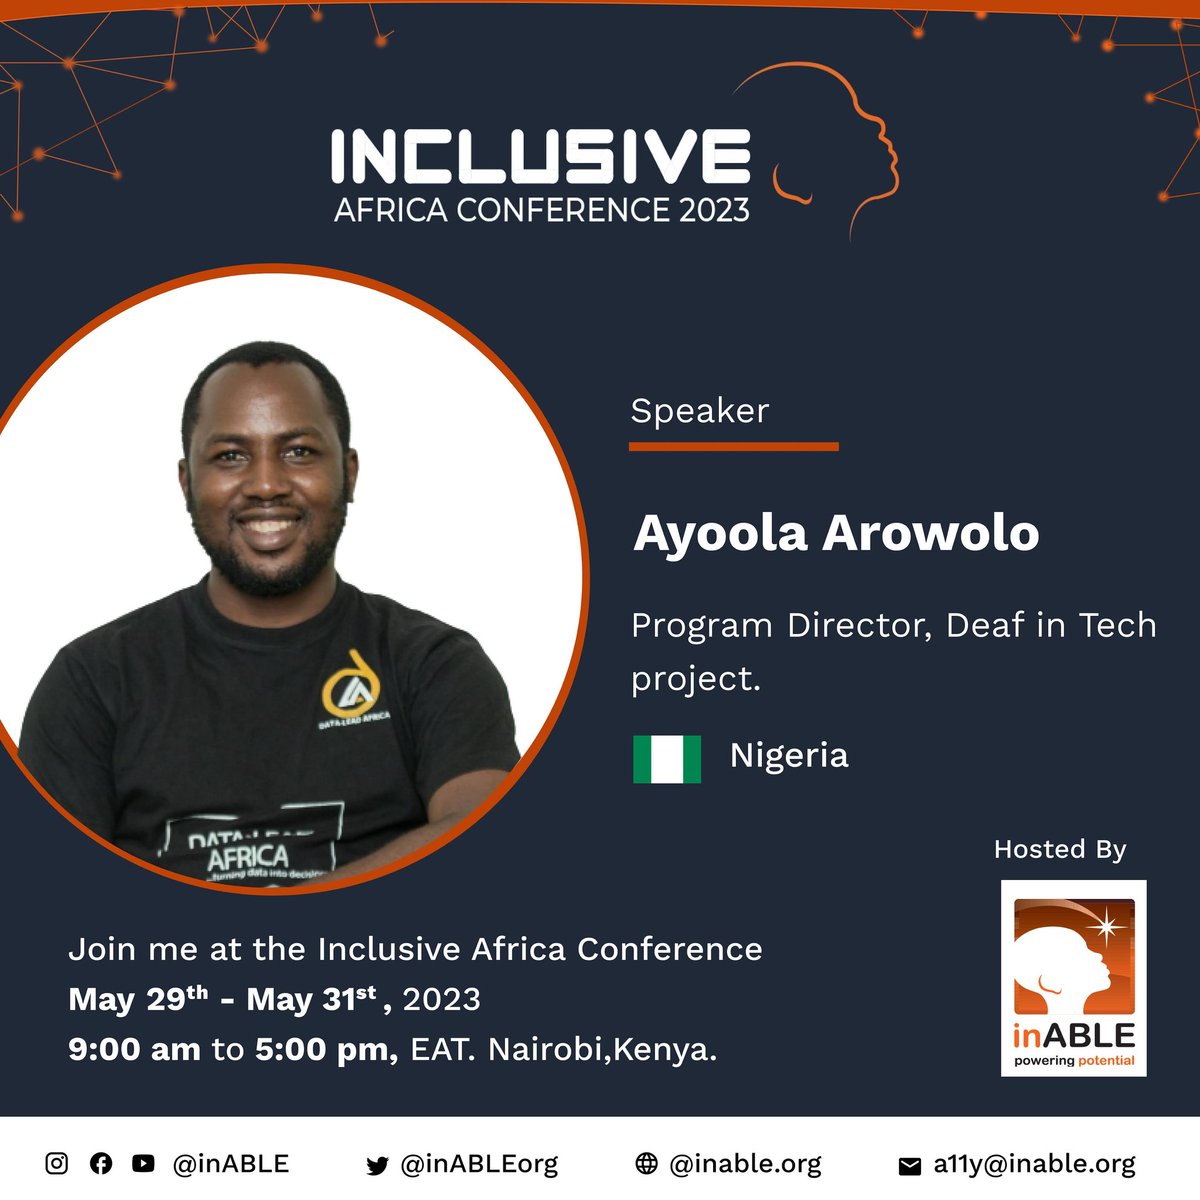 I will be speaking at #InclusiveAfrica2023 from 29th - 31st May in Nairobi, Kenya. Join me by registering for the conference here hopin.com/events/inclusi… and let's take accessible technology in Africa to the next level. Virtual attendance is free. @inABLEorg #A11yAfrica2023